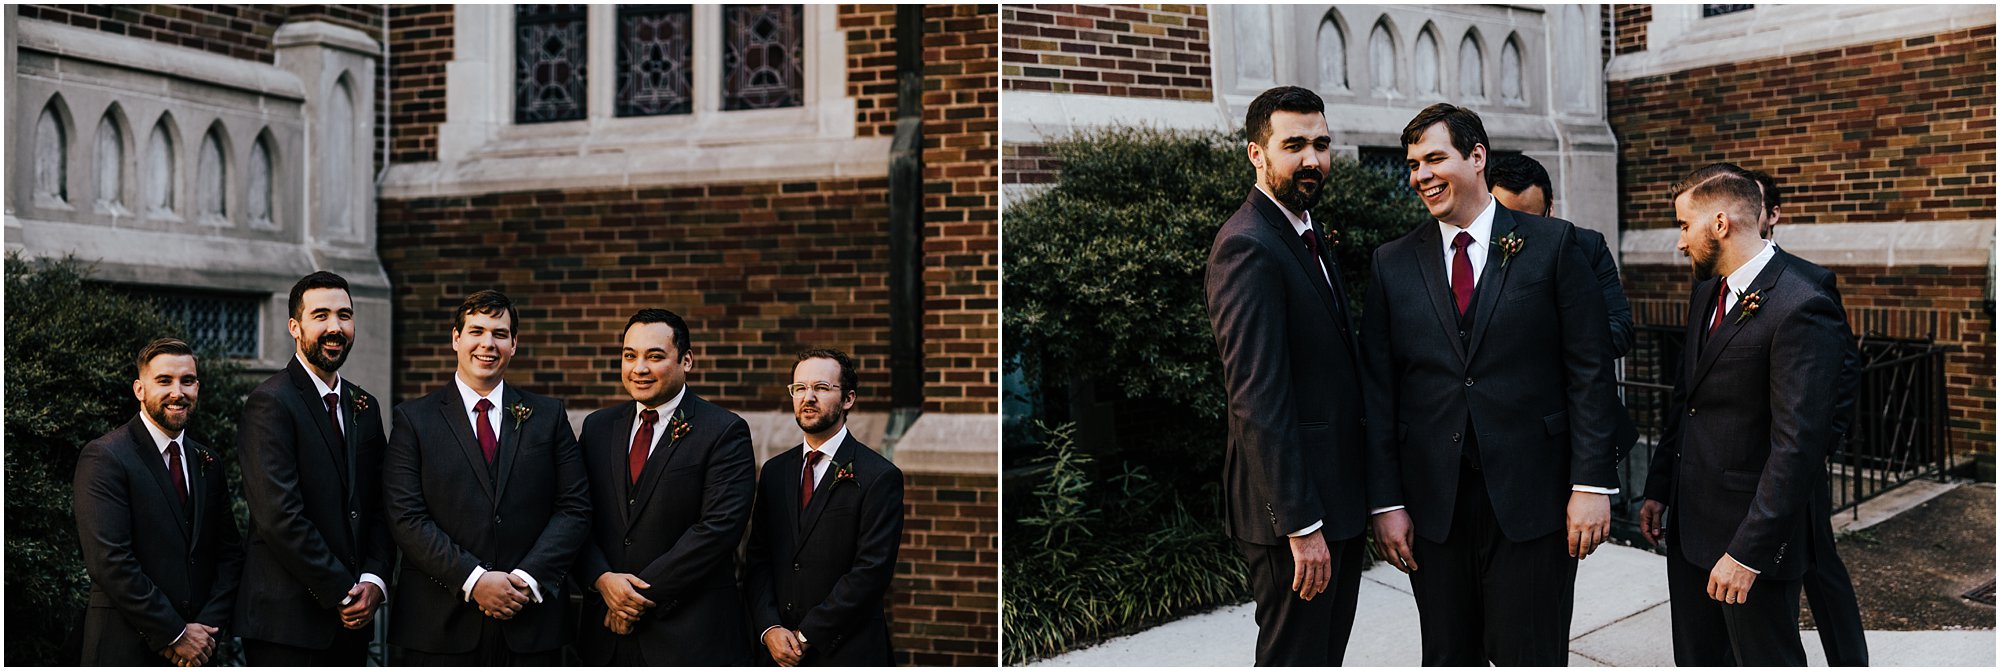 Candid shots with groomsmen 